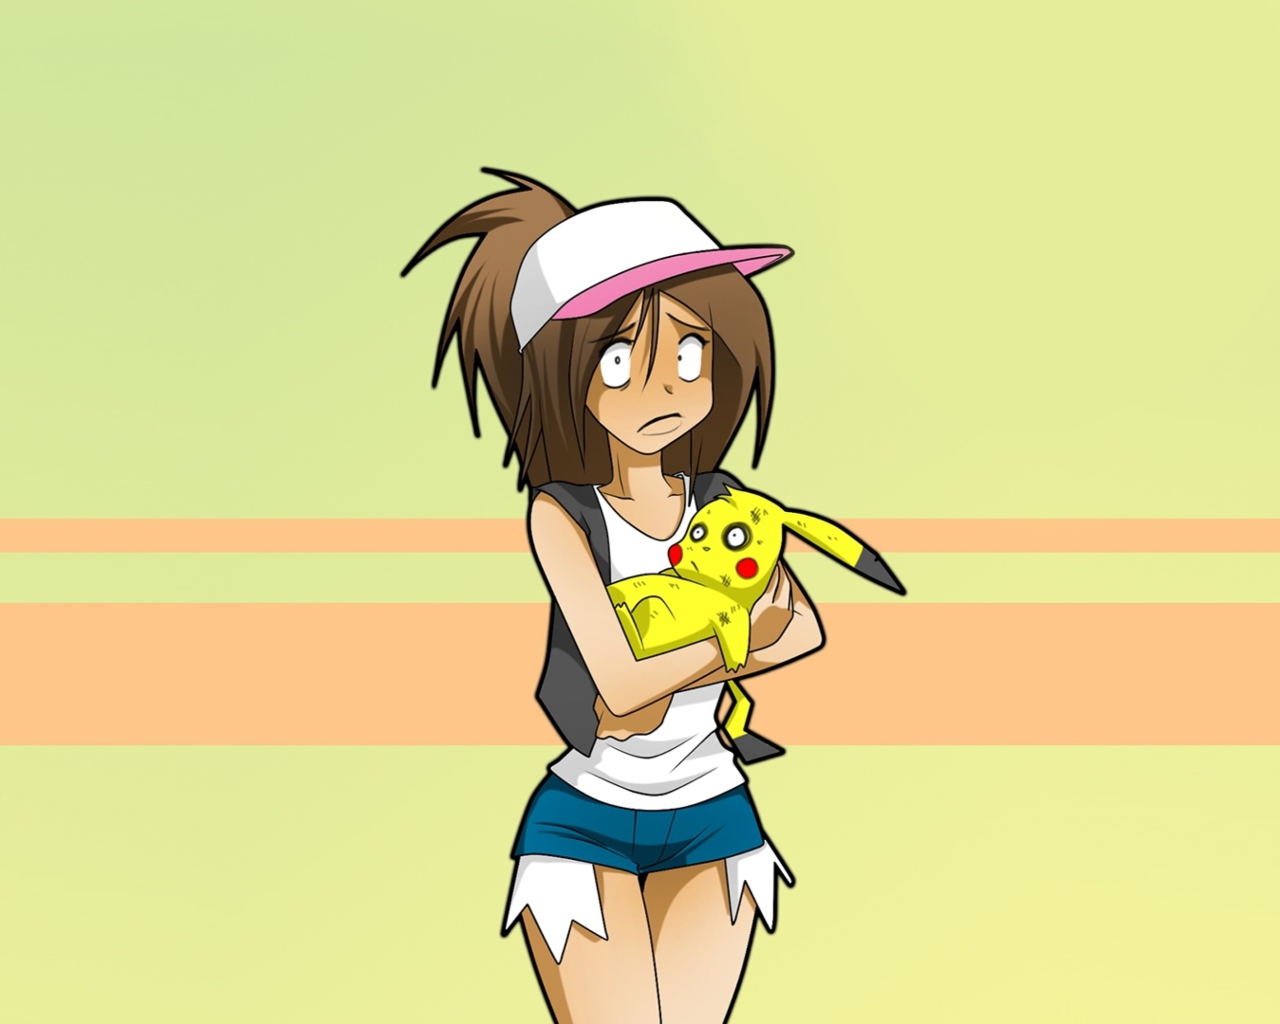 Hipster Girl And Her Pikachu wallpaper 1280x1024